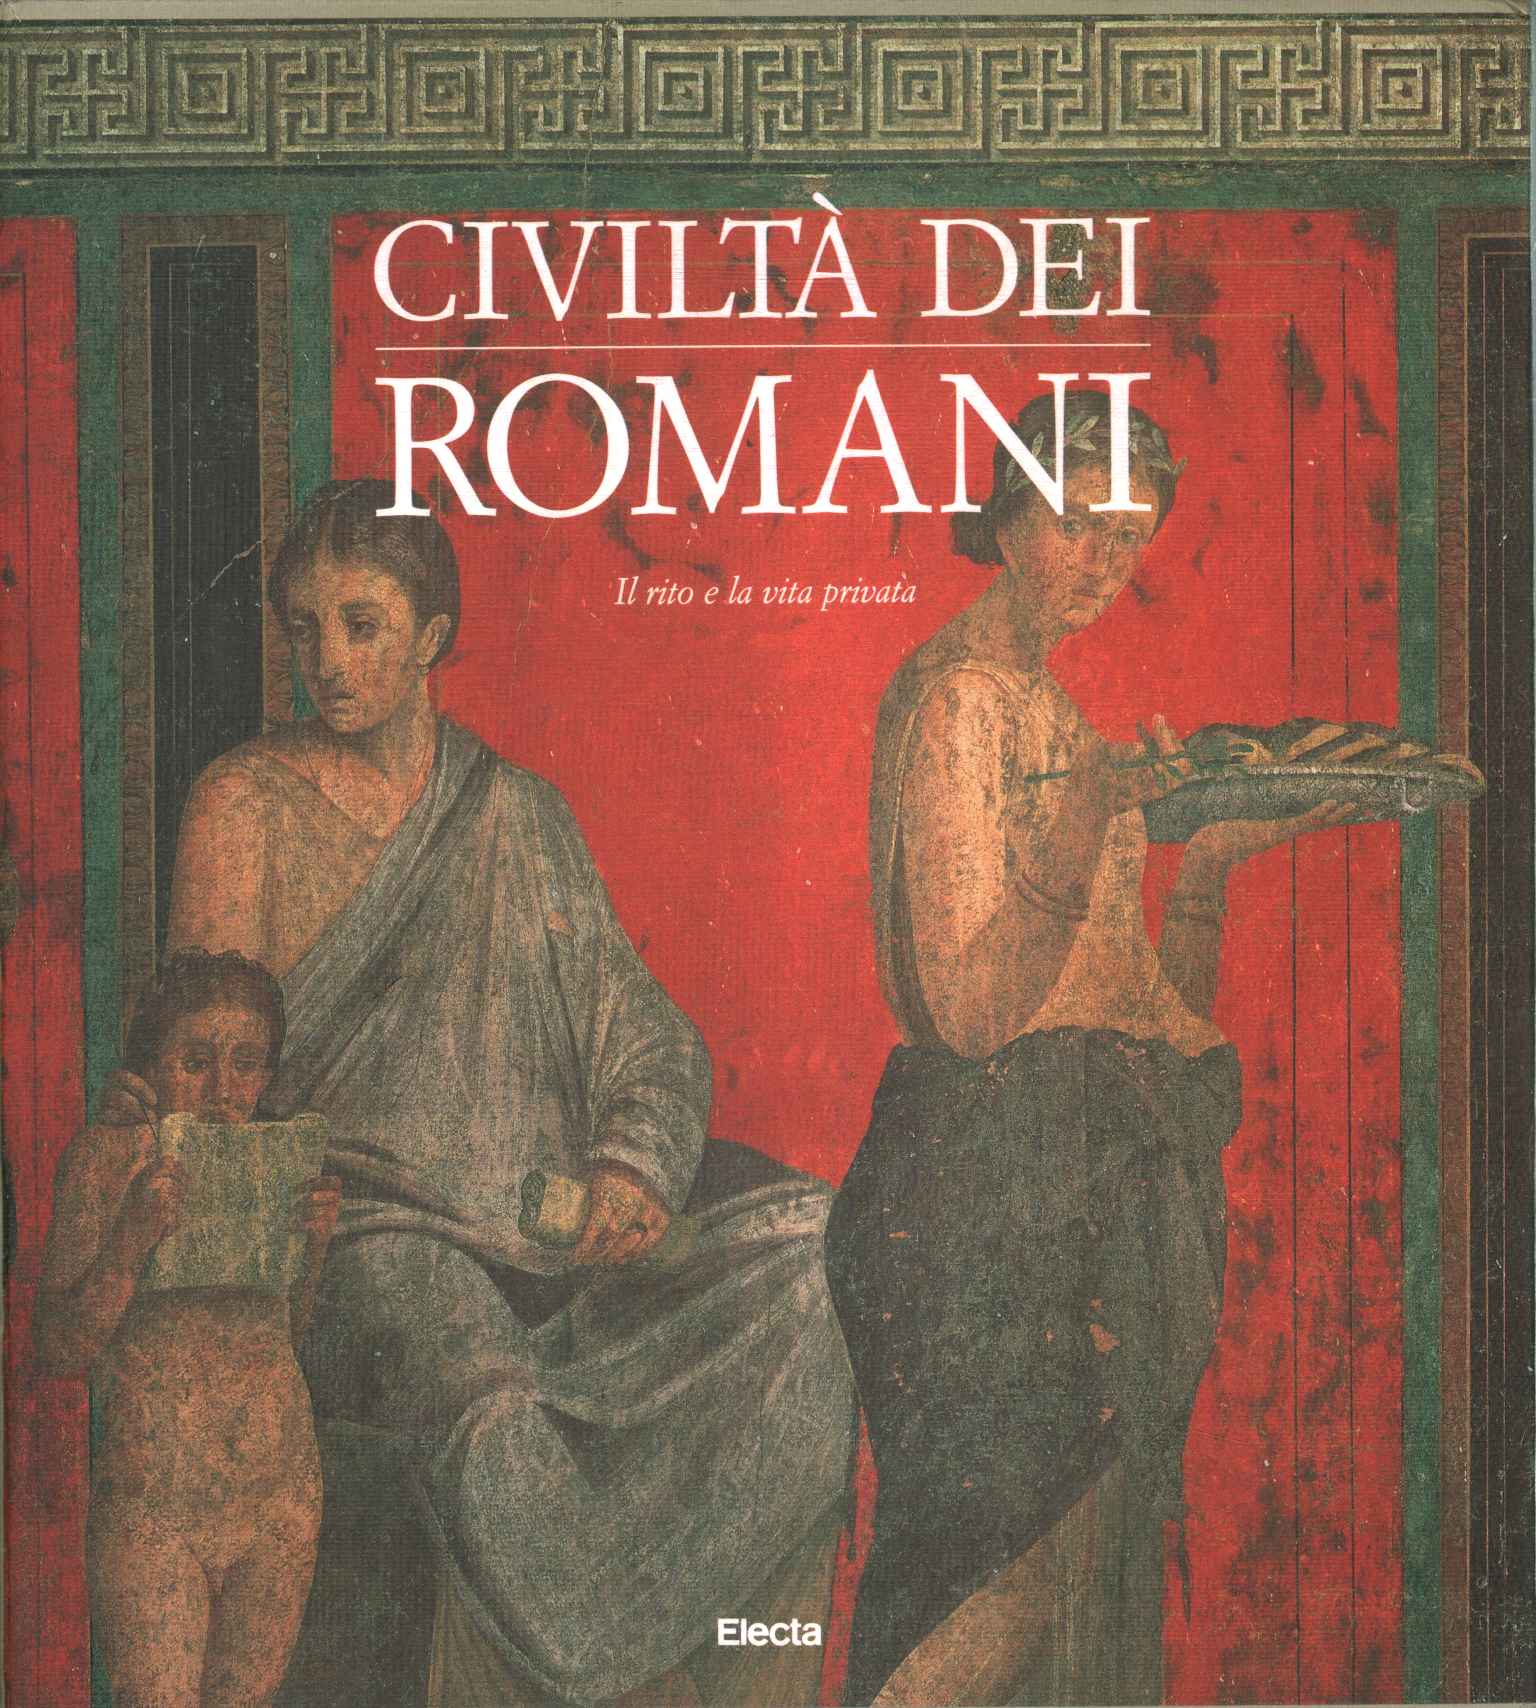 Civilization of the Romans, Civilization of the Romans. The rite and the Roman civilization. The ritual and the%